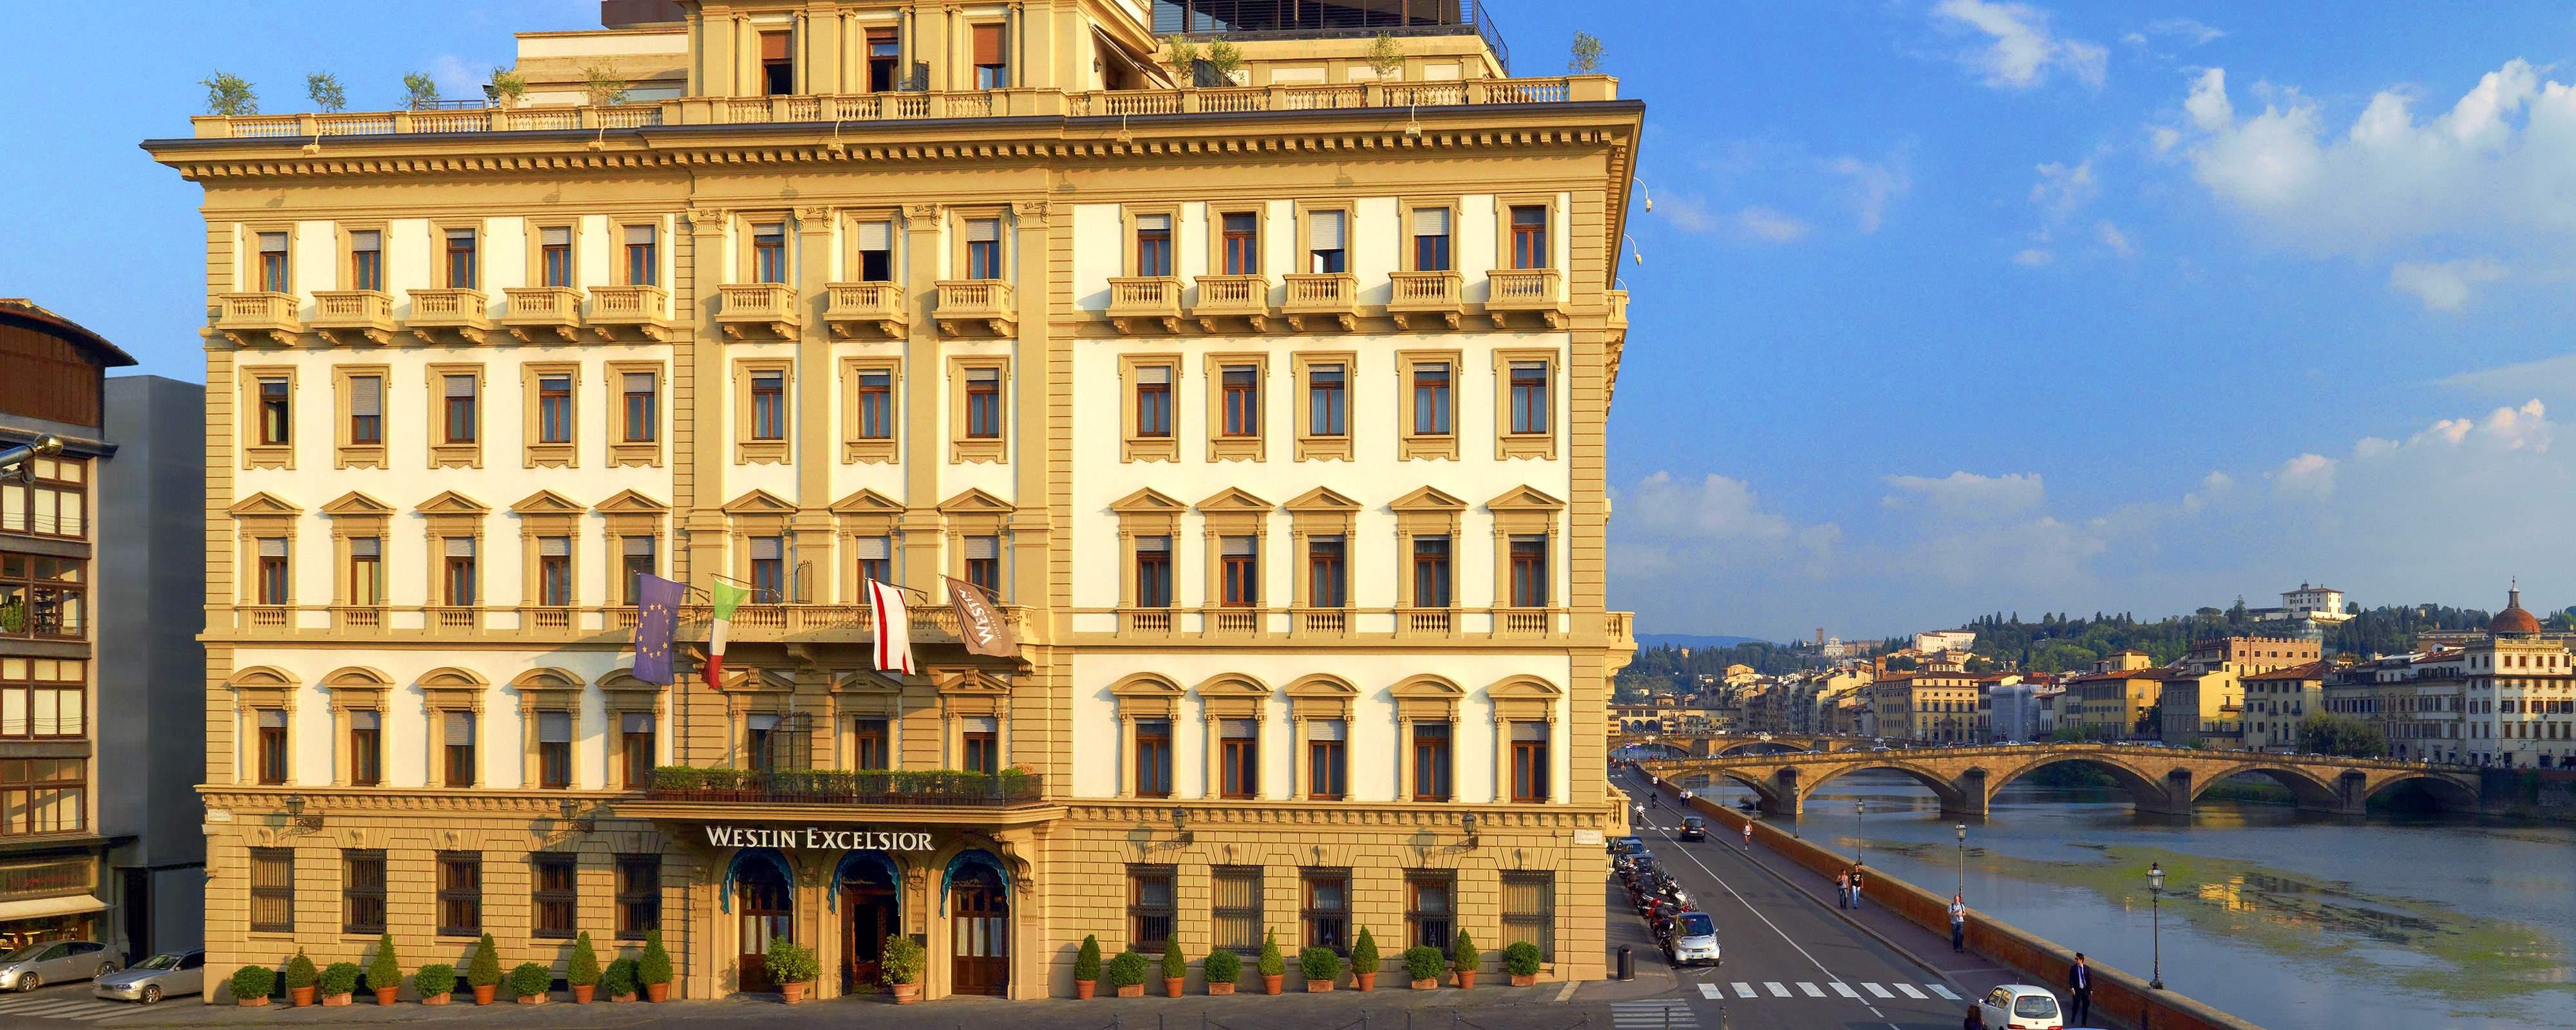 Image for The Westin Excelsior, Florence, a Marriott hotel.